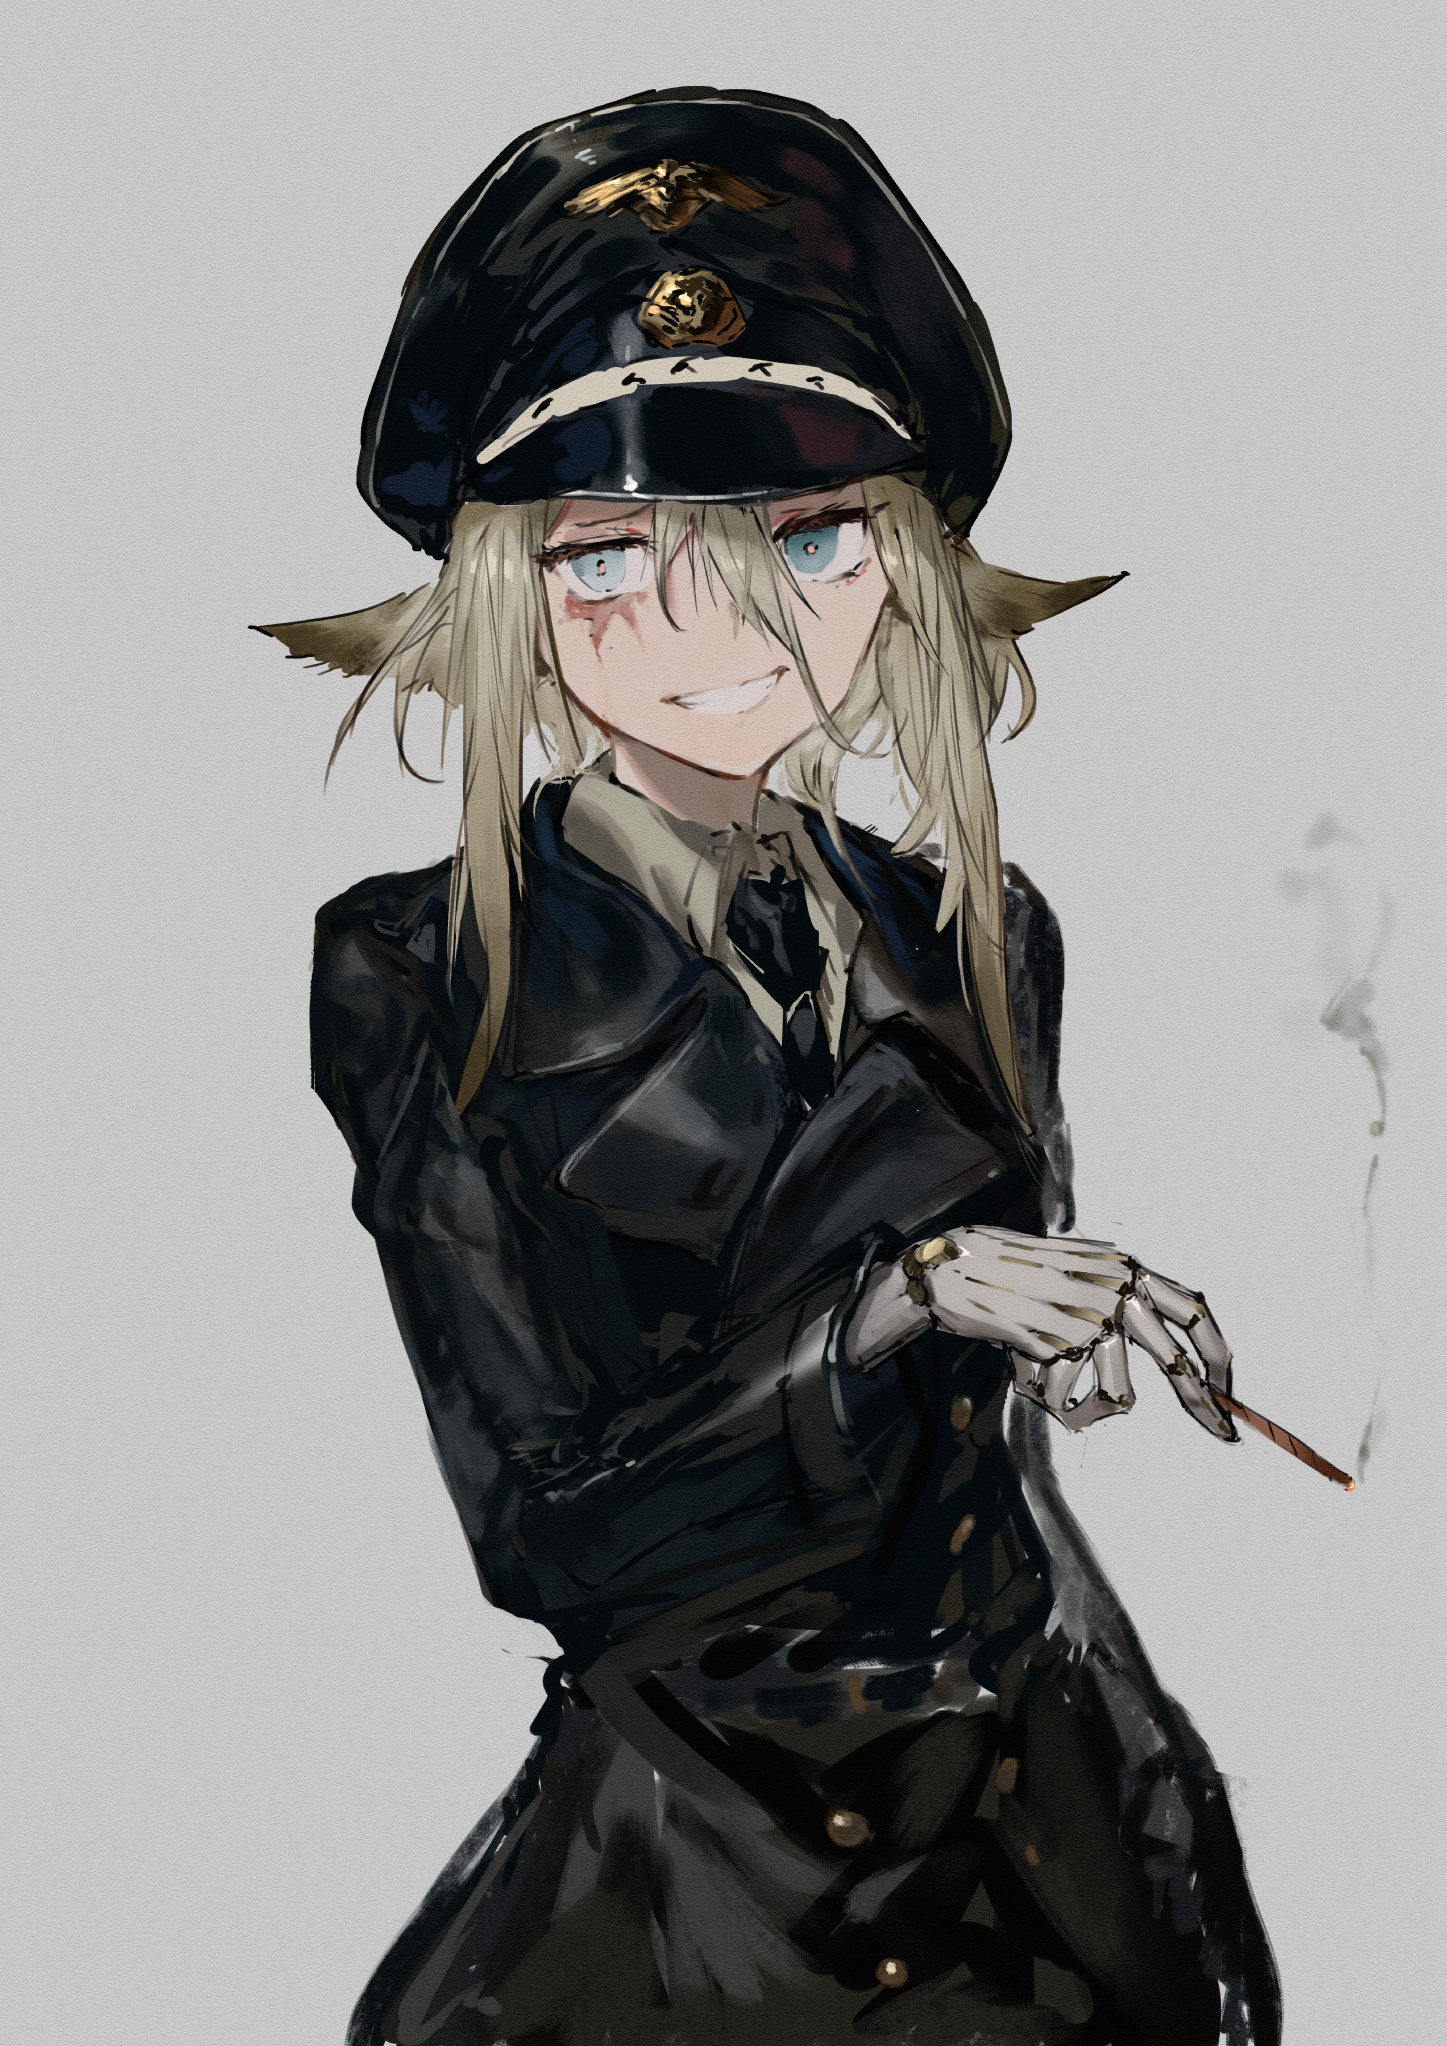 Anime 1447x2046 original characters blue eyes blonde military uniform Military Hat peaked cap anime girls stylized military uniform gauntlets necktie leather coat leather hat long hair smoking cigars anime tie pale prosthesis hat suits German detailed details high detail Caucasian long coat european